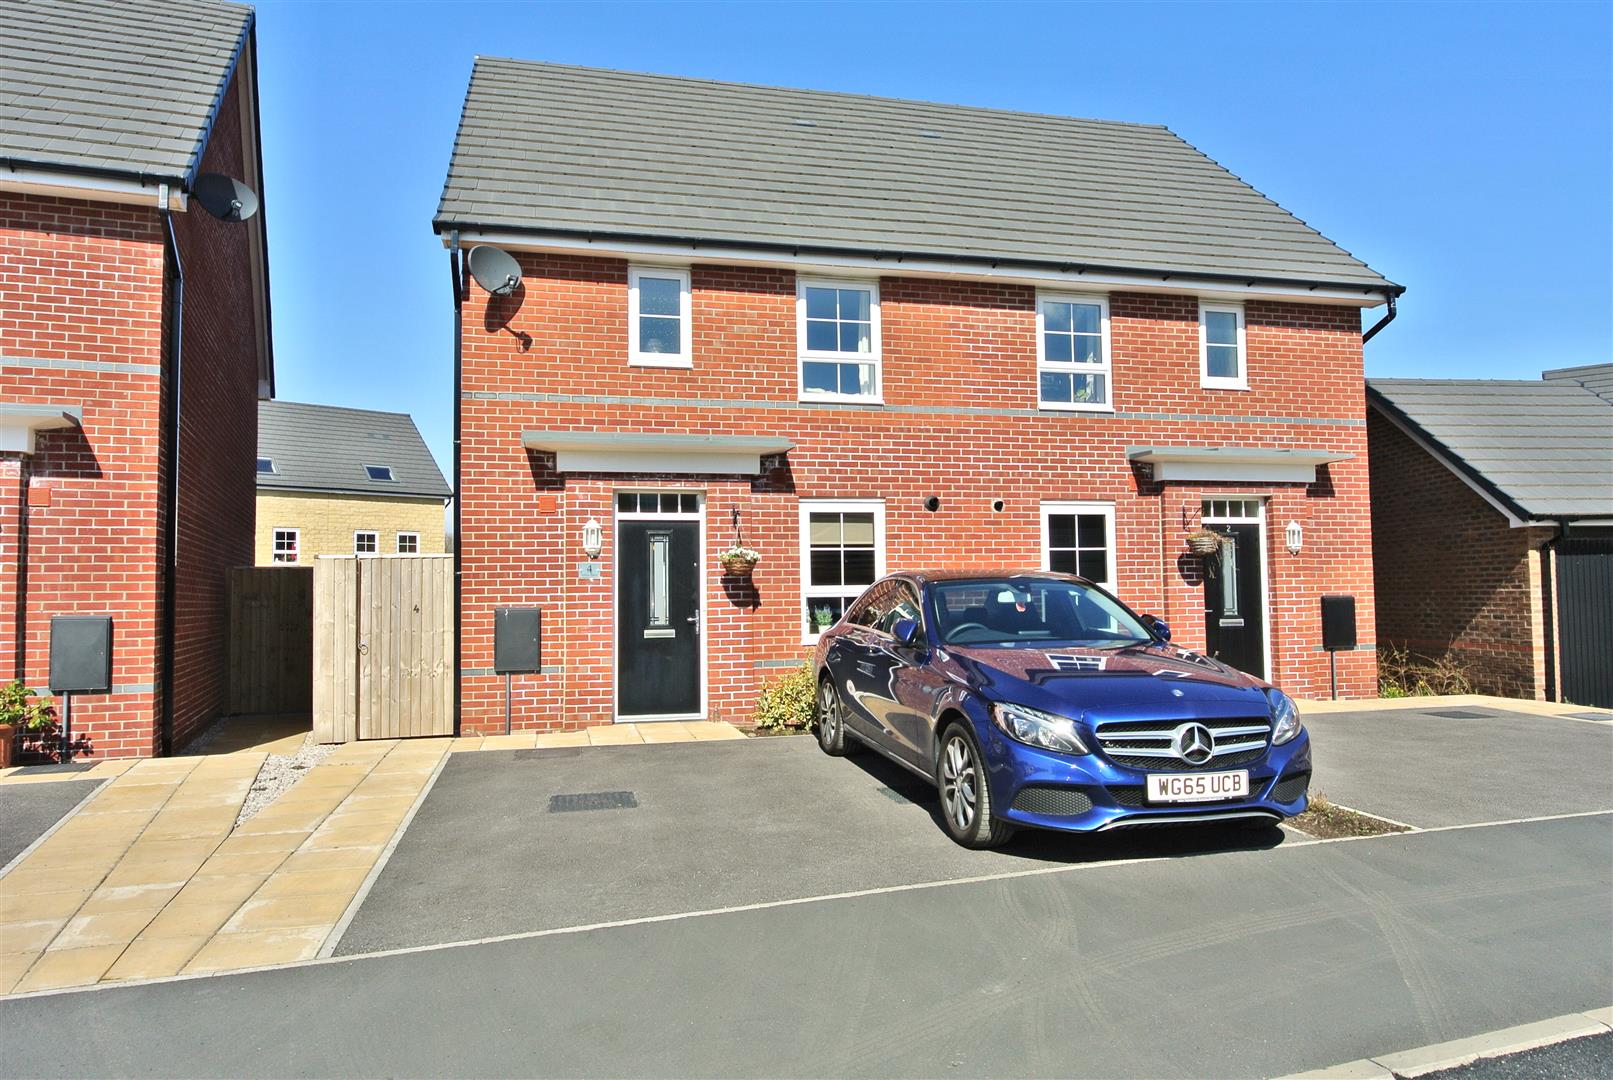 Lancaster new build properties can be an excellent investment